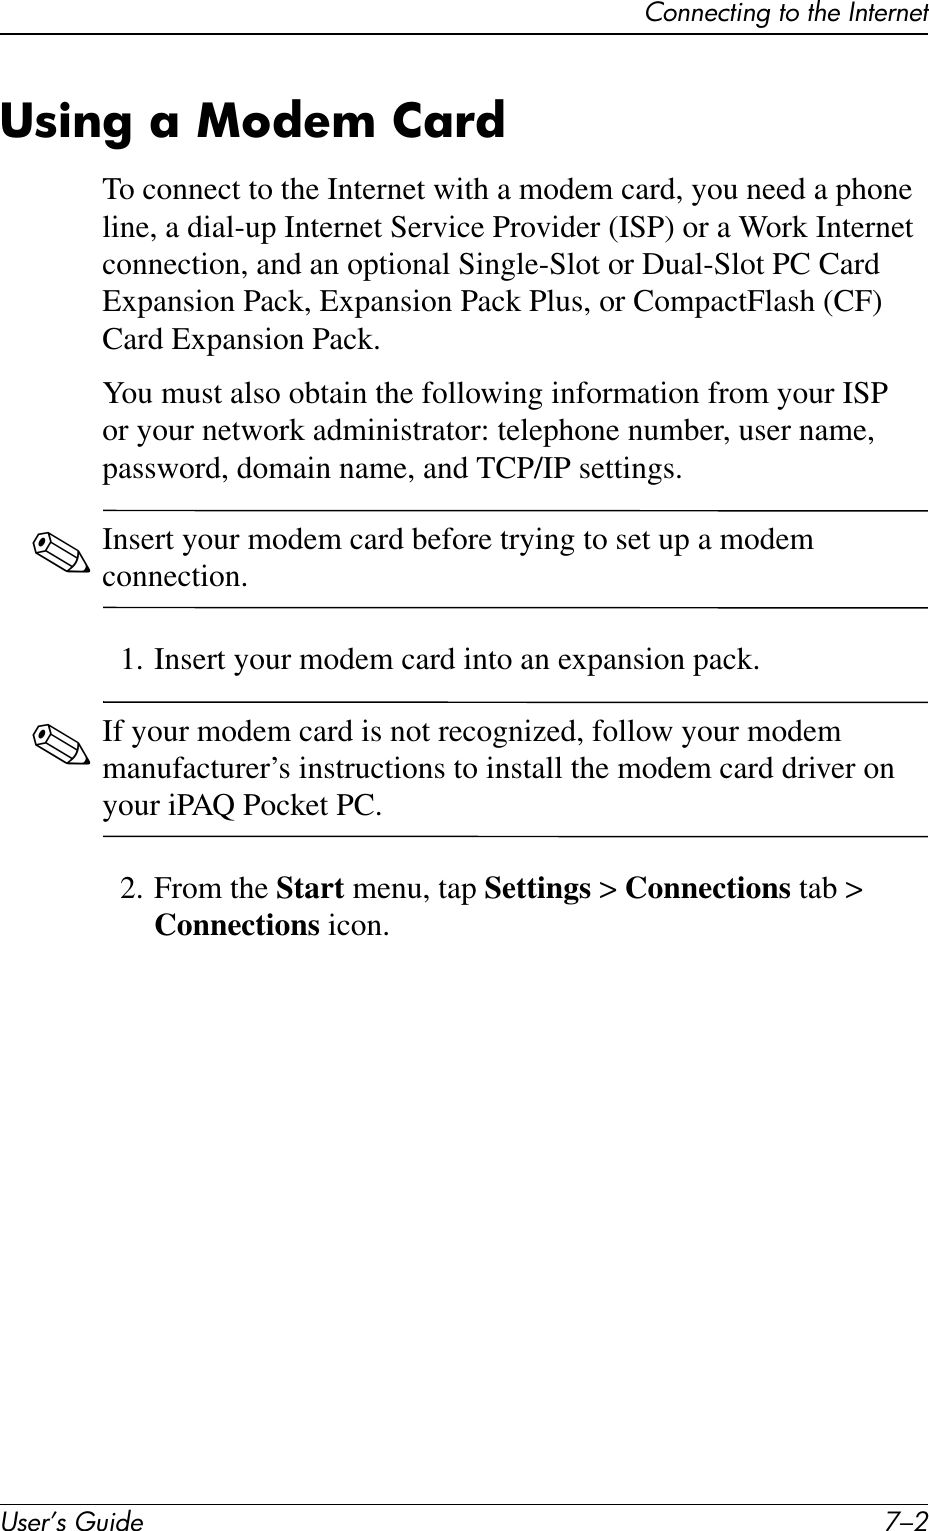 User’s Guide 7–2Connecting to the InternetUsing a Modem CardTo connect to the Internet with a modem card, you need a phone line, a dial-up Internet Service Provider (ISP) or a Work Internet connection, and an optional Single-Slot or Dual-Slot PC Card Expansion Pack, Expansion Pack Plus, or CompactFlash (CF) Card Expansion Pack.You must also obtain the following information from your ISP or your network administrator: telephone number, user name, password, domain name, and TCP/IP settings.✎Insert your modem card before trying to set up a modem connection.1. Insert your modem card into an expansion pack.✎If your modem card is not recognized, follow your modem manufacturer’s instructions to install the modem card driver on your iPAQ Pocket PC.2. From the Start menu, tap Settings &gt; Connections tab &gt; Connections icon.